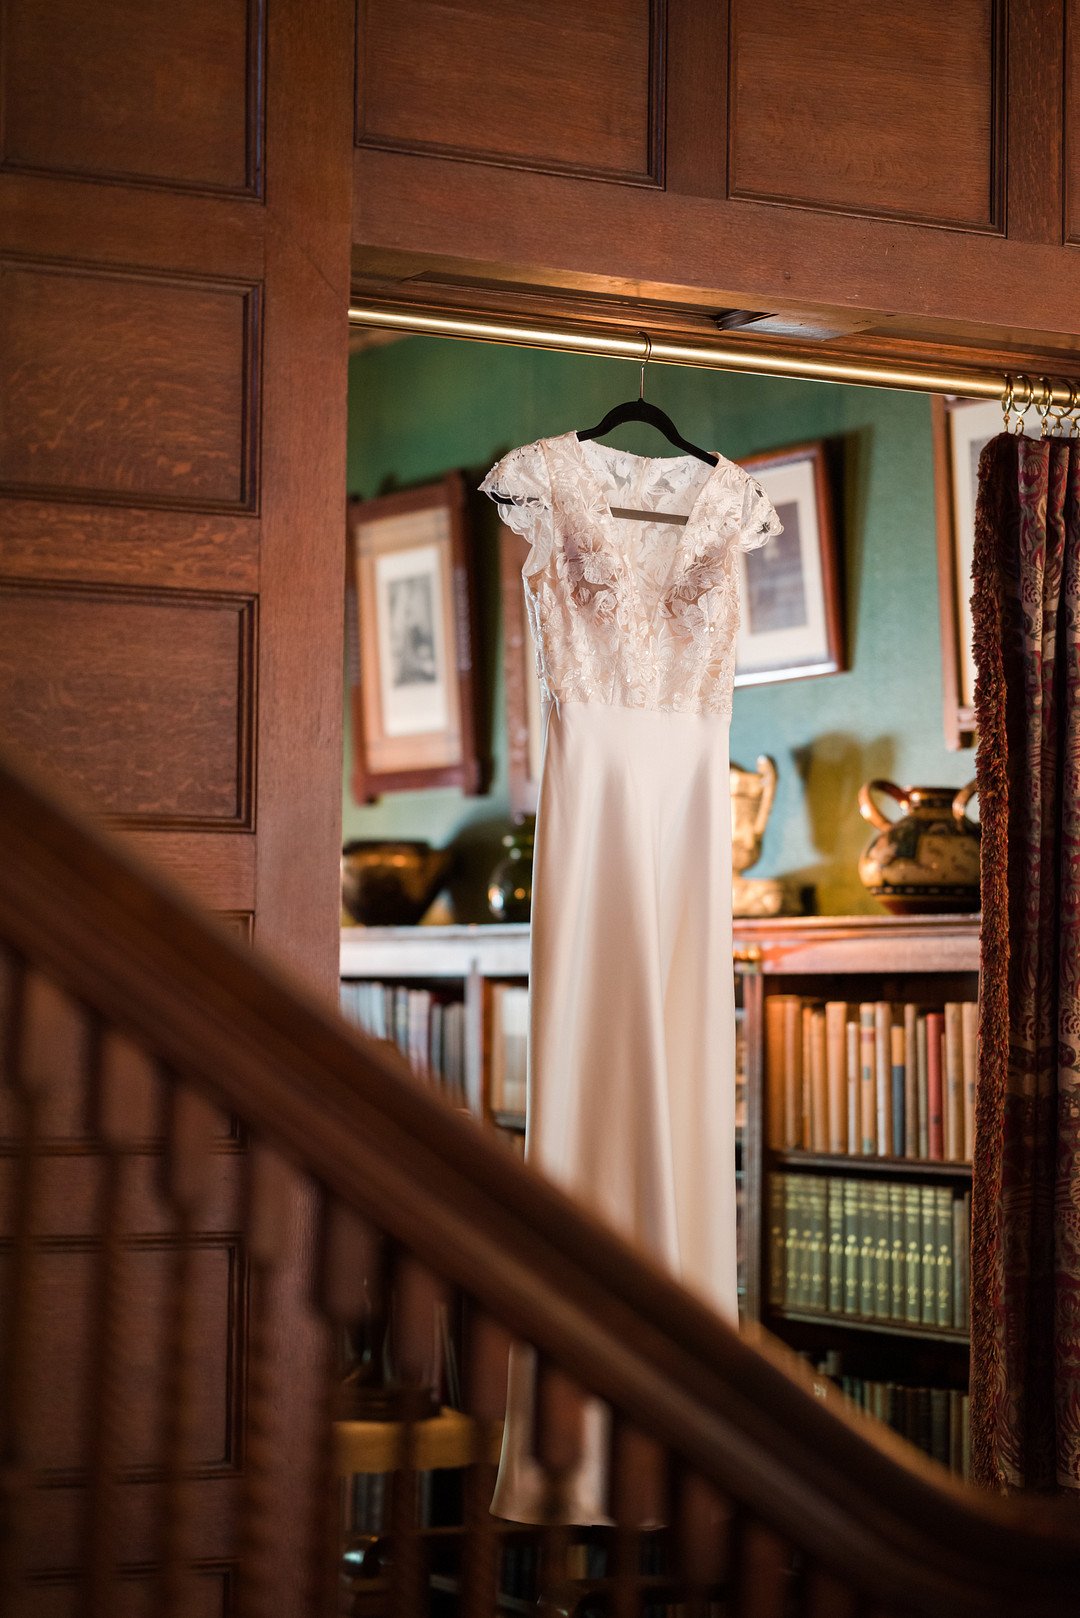 Chan_Chan_Winterlyn Photography_GLESSNER HOUSE CHICAGO WEDDING-10_low.jpg